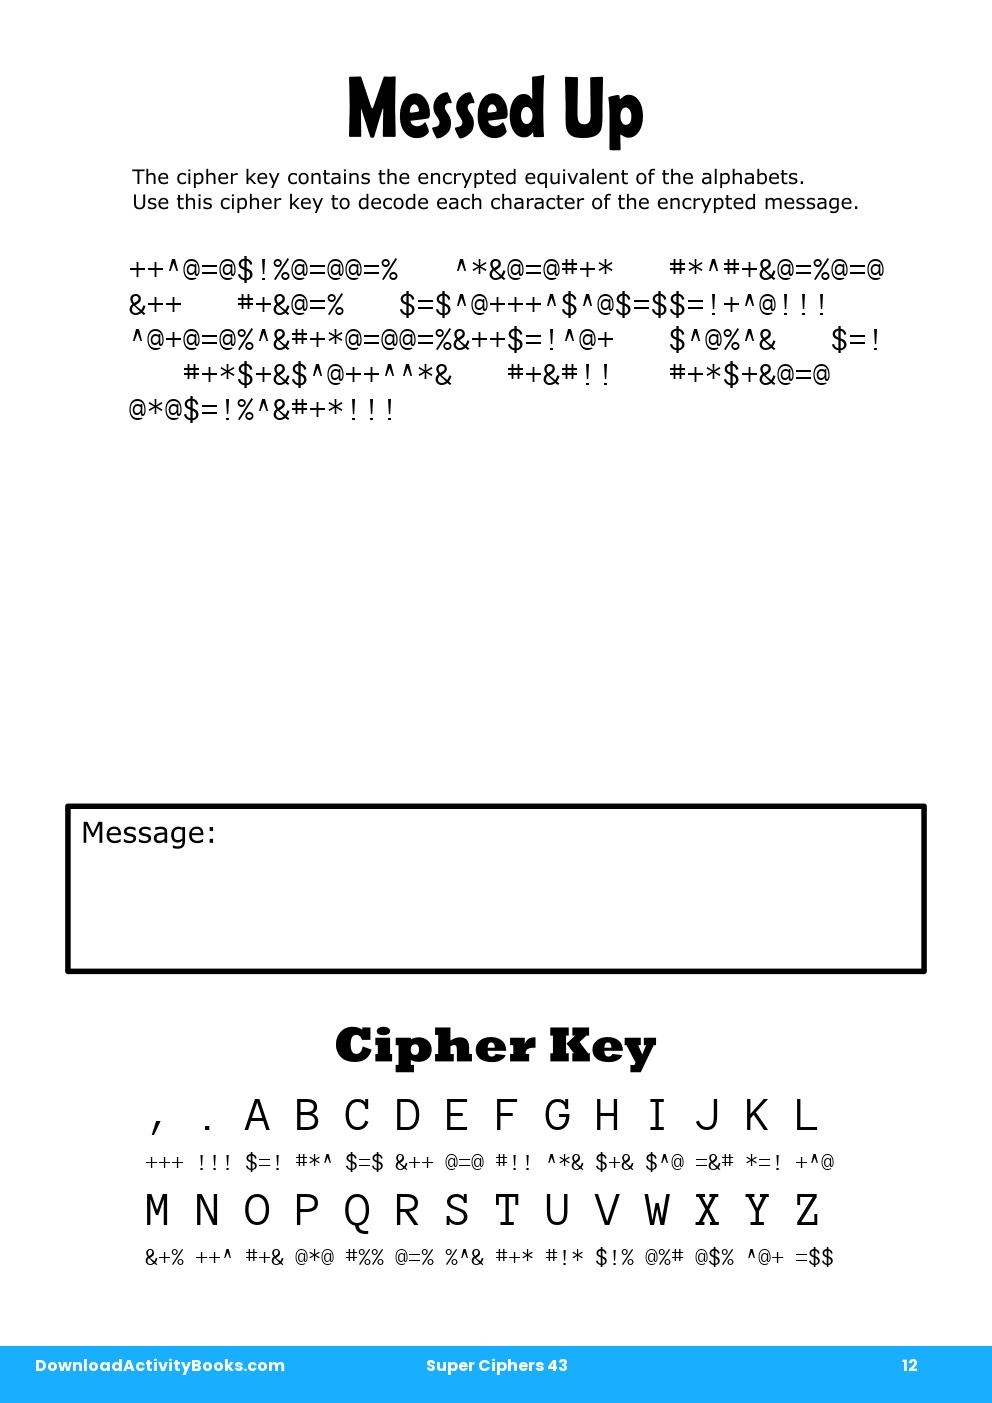 Messed Up in Super Ciphers 43